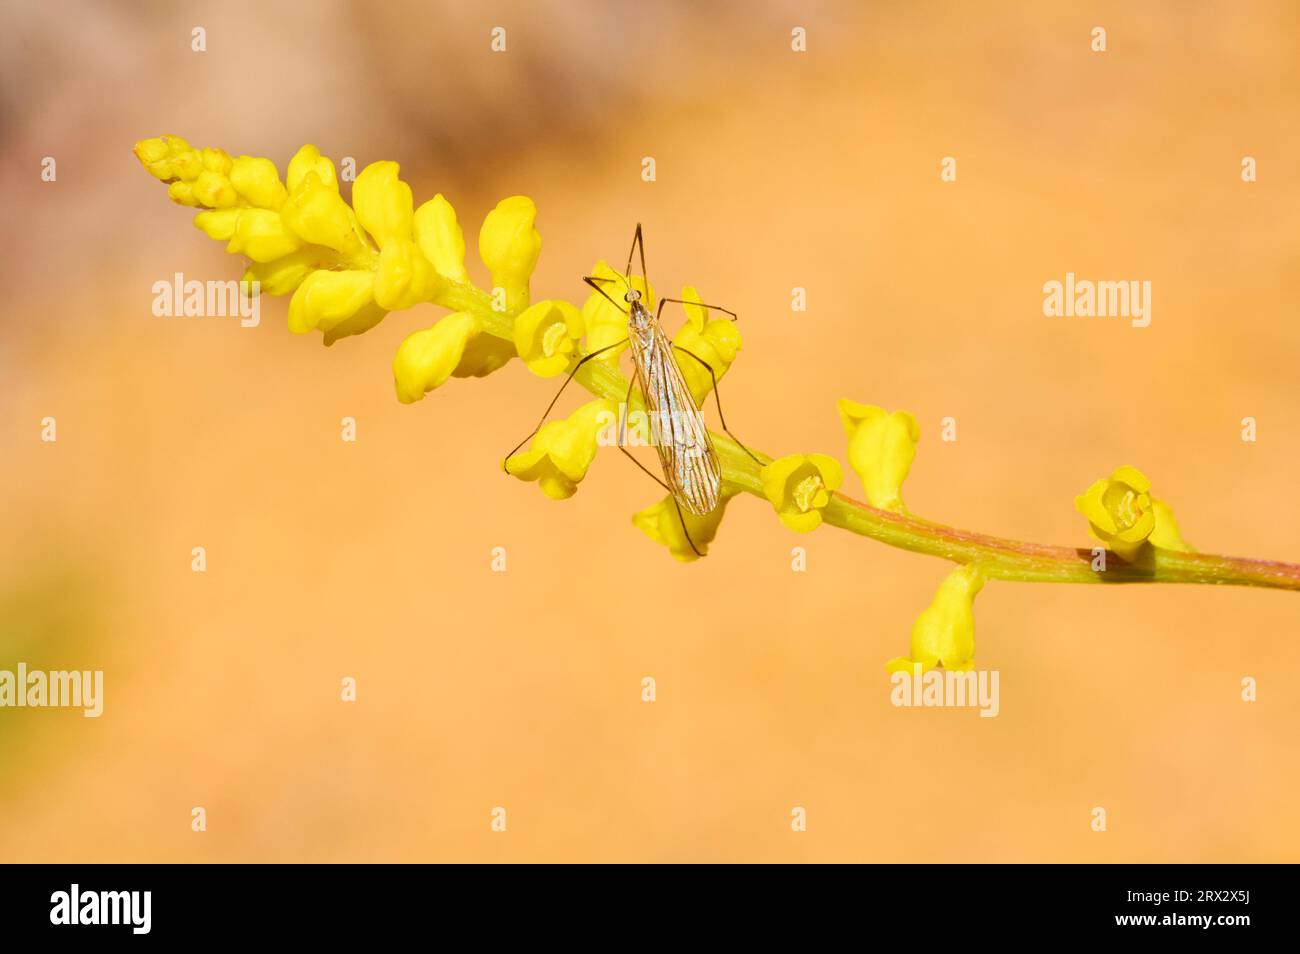 A Hangingfly, Bittacus species, on the yellow flower of Synaphea gracillima, a wildflower species native to the south-west region of Western Australia. Stock Photo